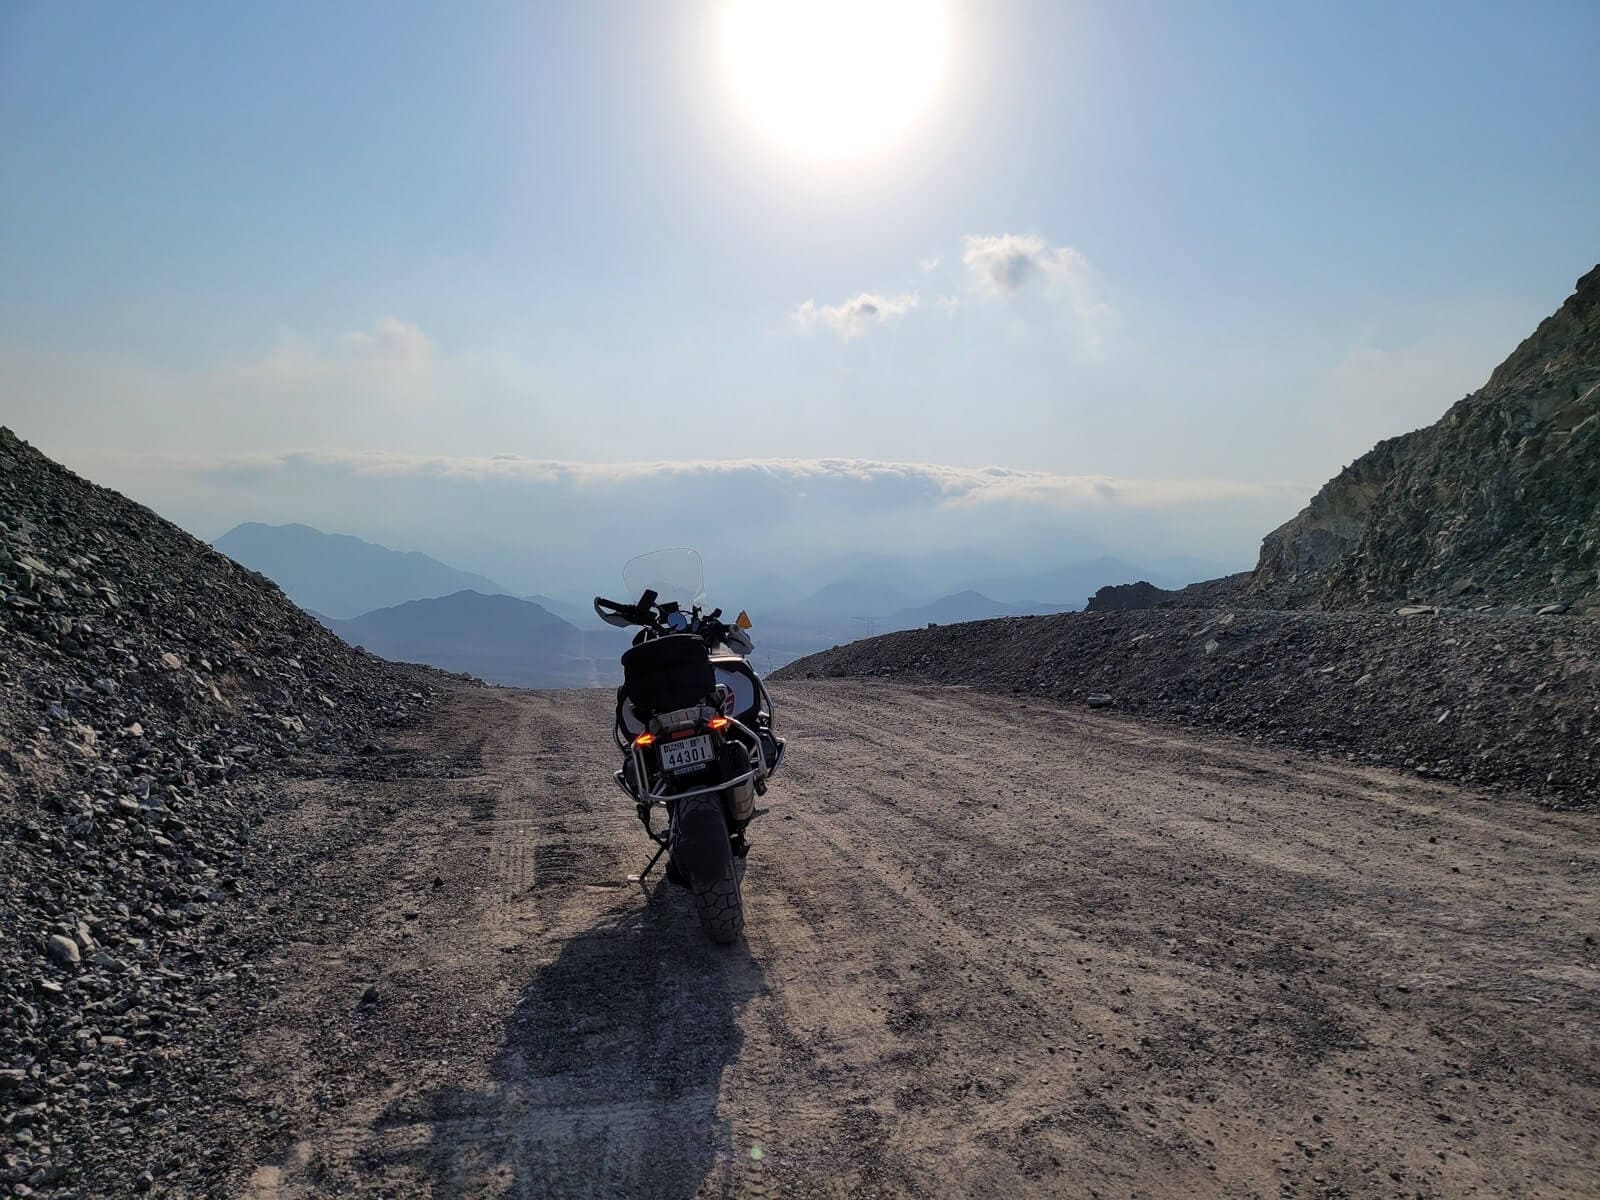 Crossing The Border From UAE To Oman On A Rented Motorcycle